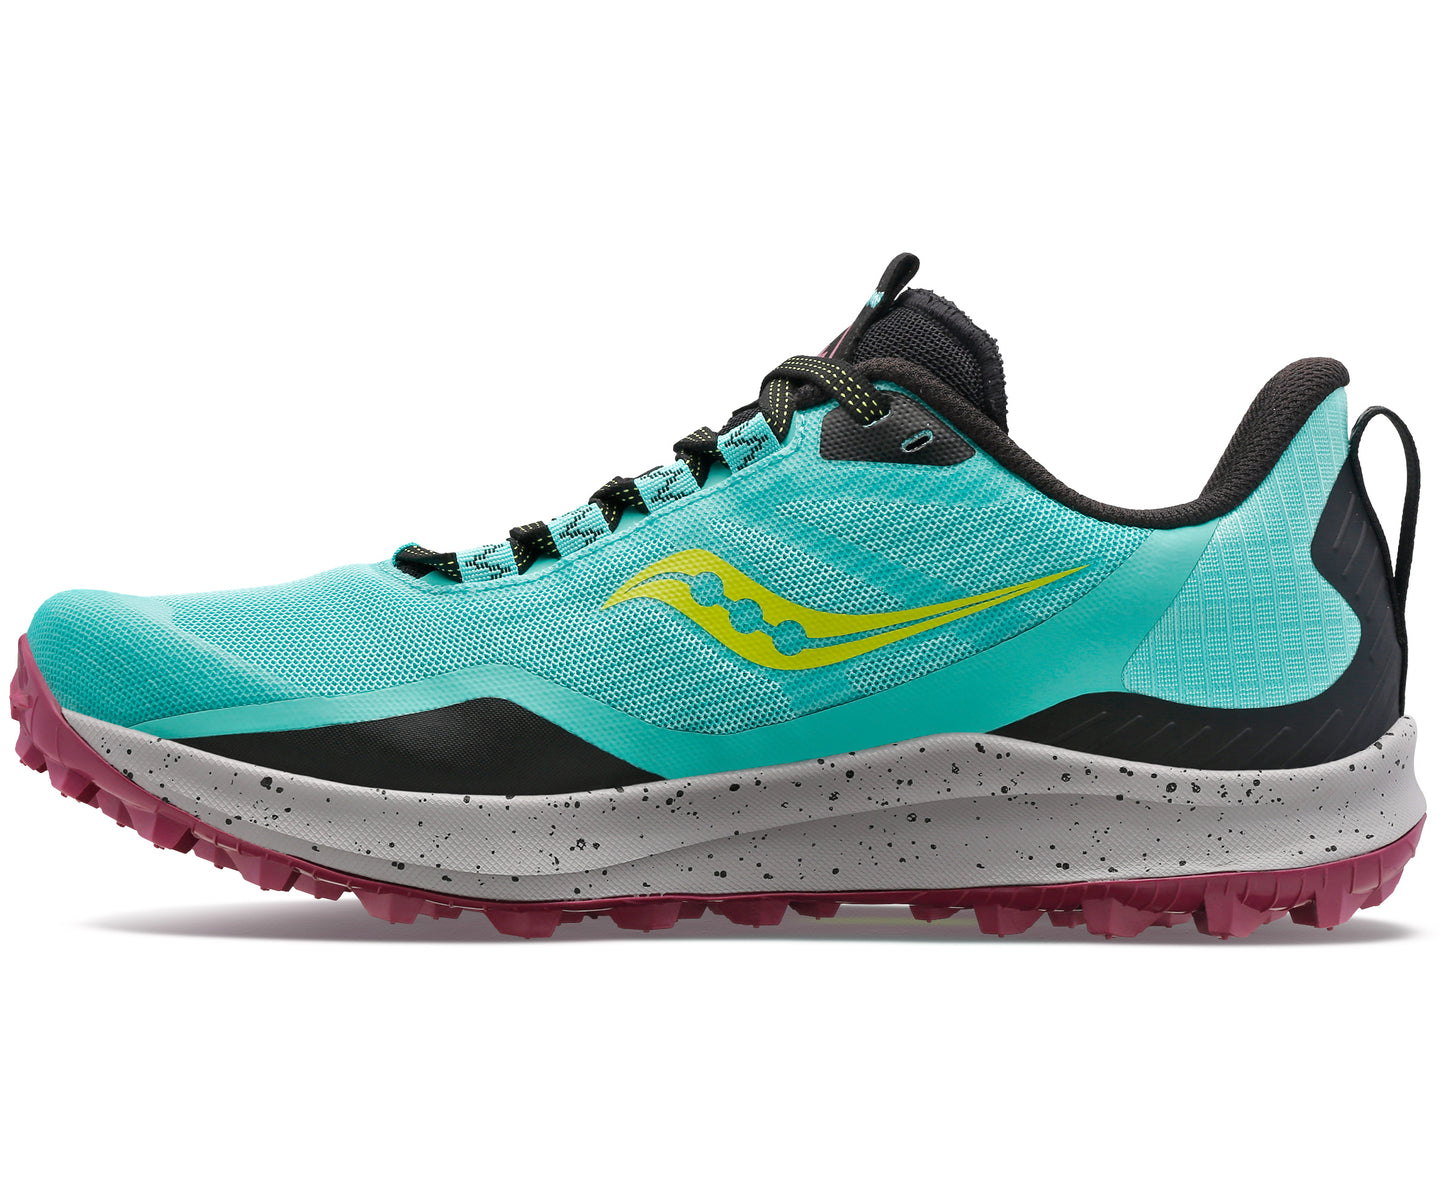 Saucony Peregrine 12 womens trail running shoe teal black and purple